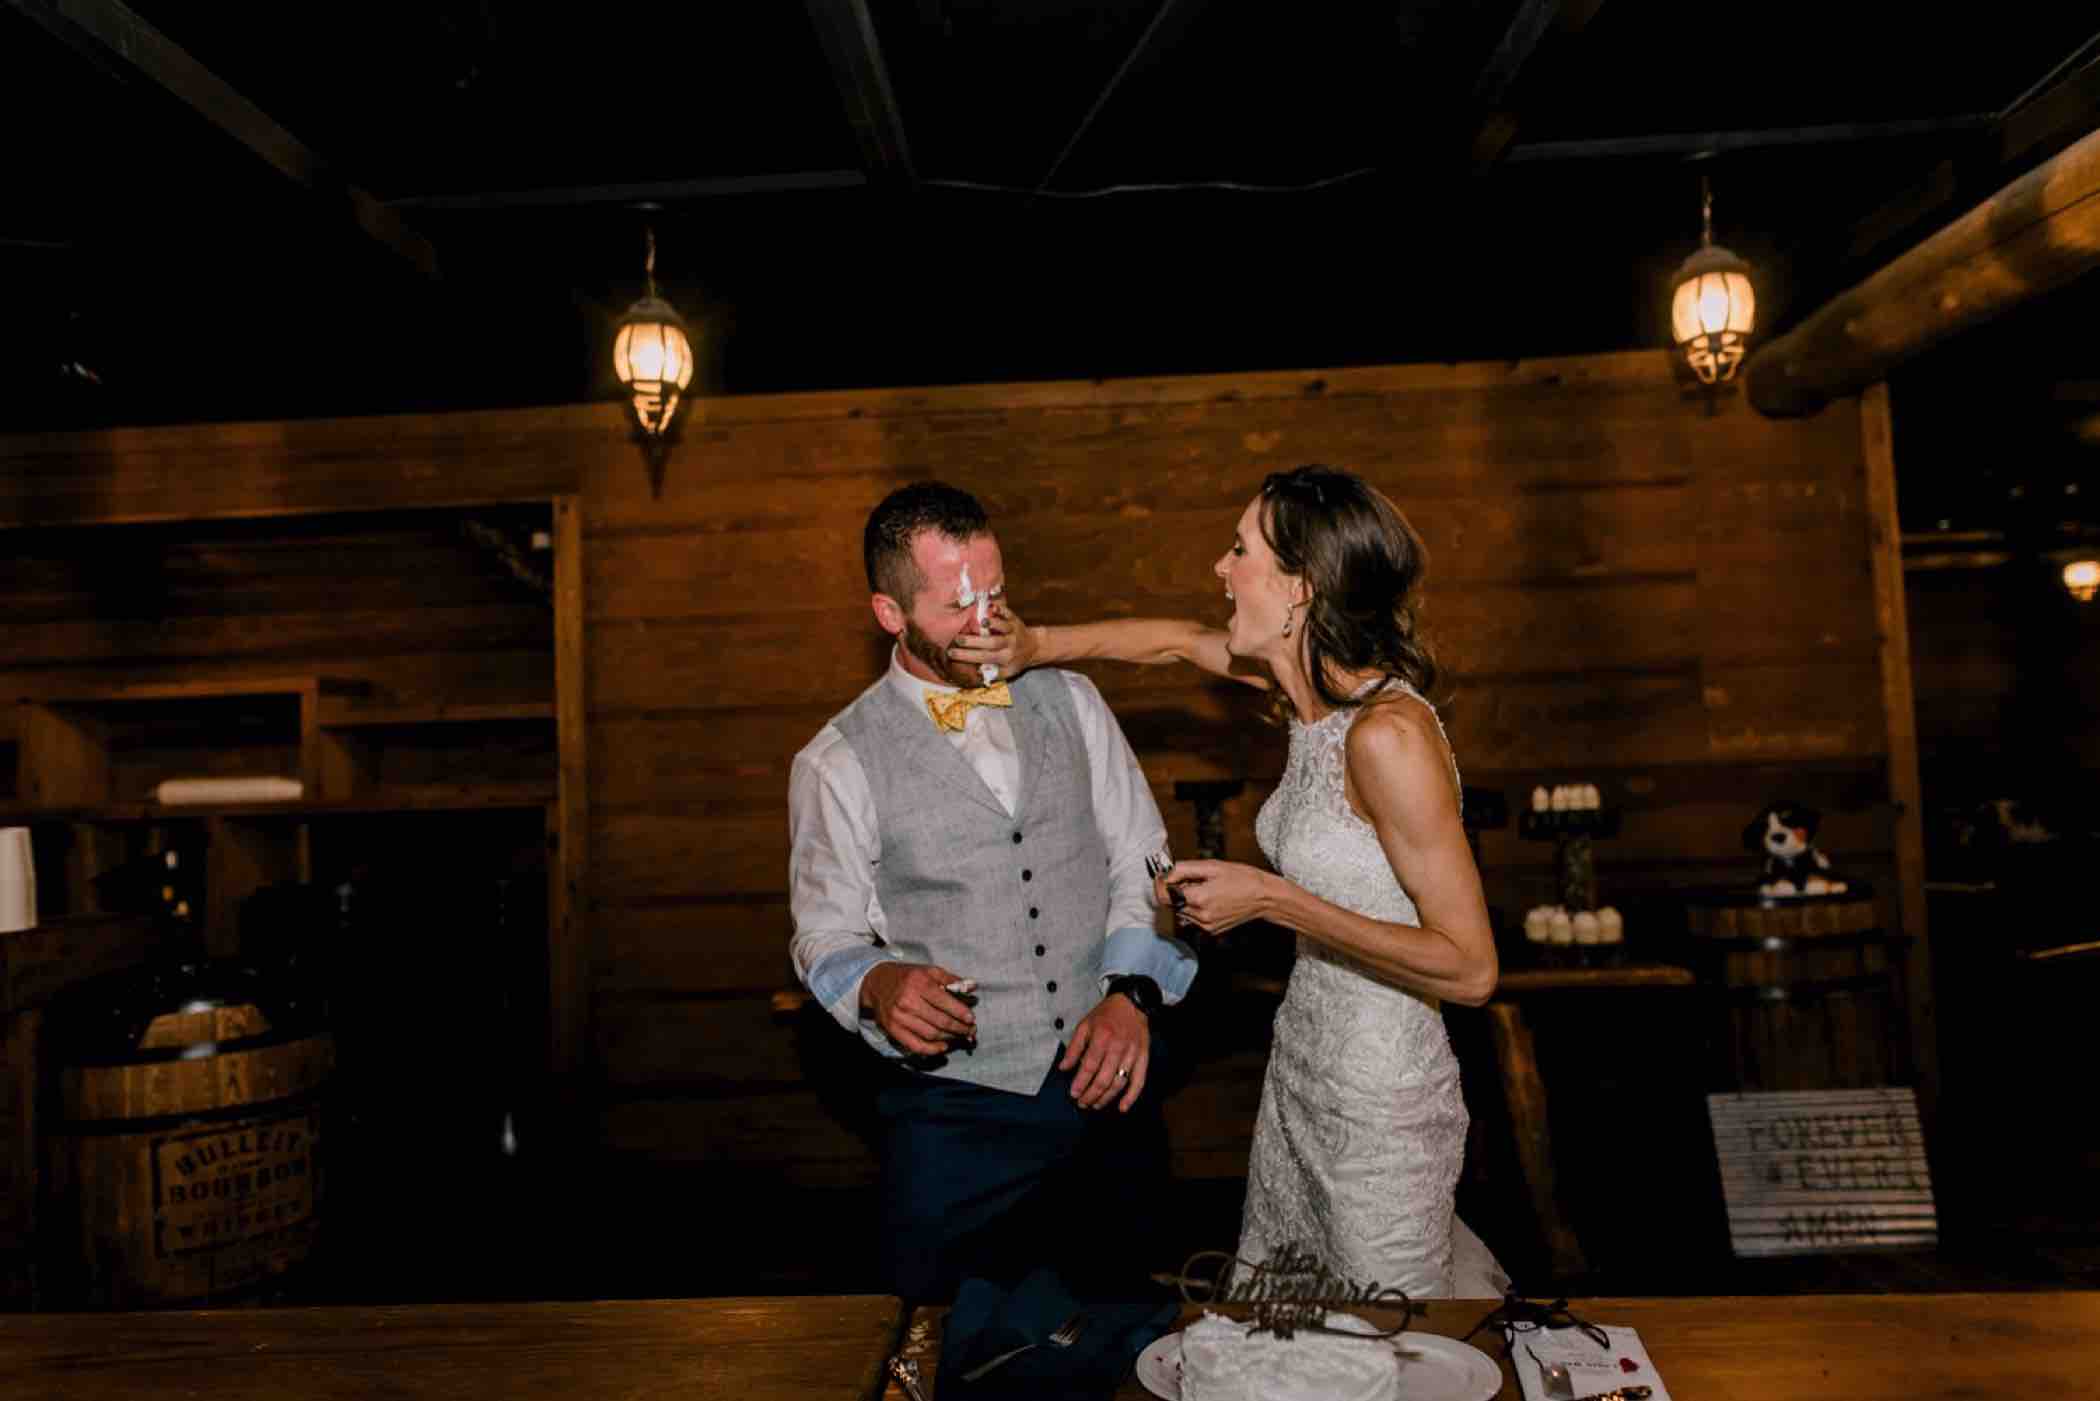 The bride smears cake on the groom during their wedding reception at Piney River Ranch in Vail in the Colorado Rocky Mountains. Photo by Ali and Garrett, Romantic, Adventurous, Nostalgic Wedding Photographers.